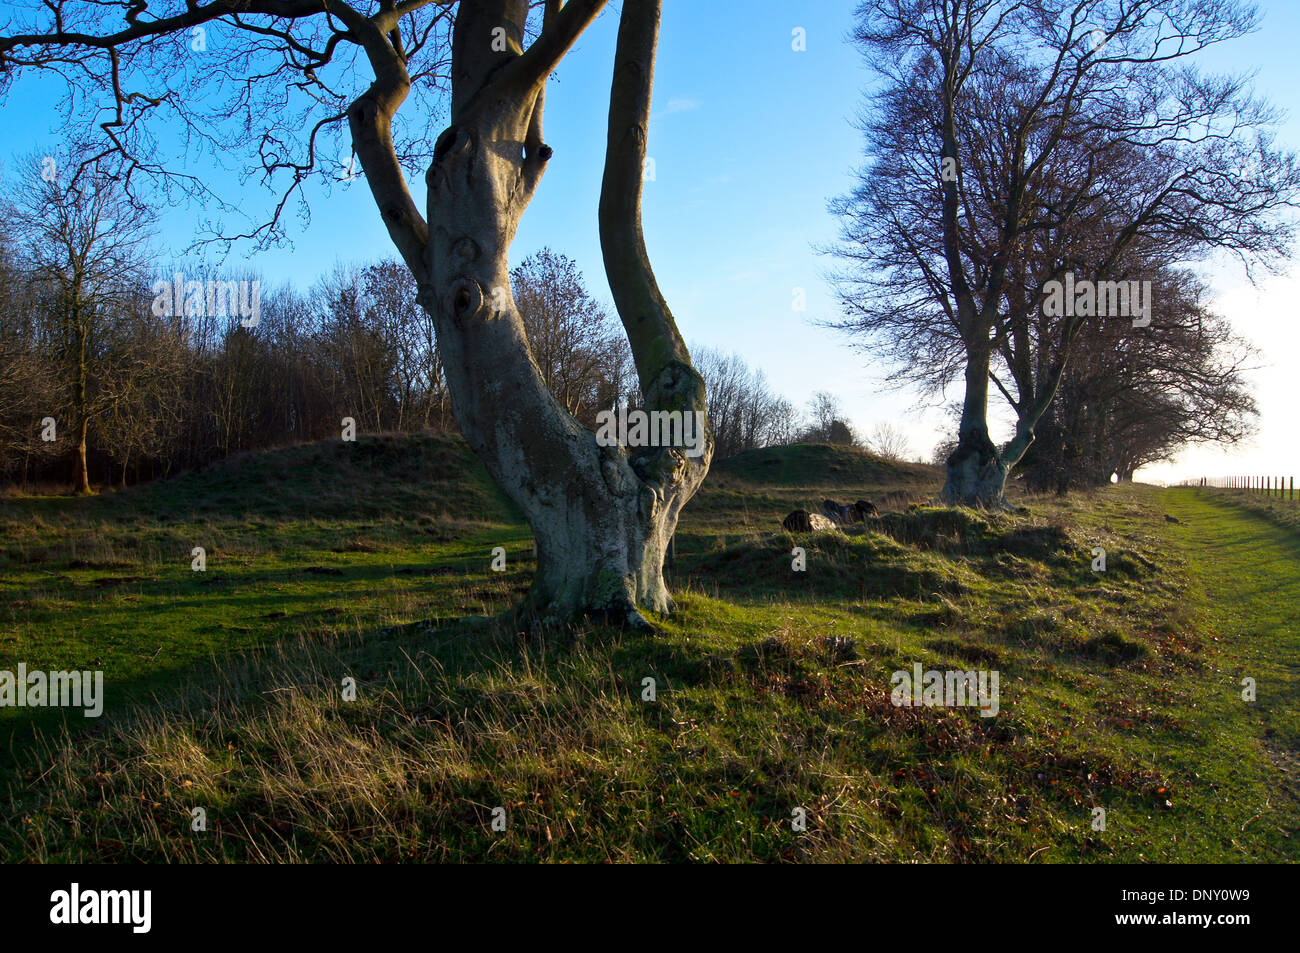 Large common beech trees (fagus sylvatica) at Neolithic New King's Barrows, near Stonehenge, Wiltshire, England Stock Photo